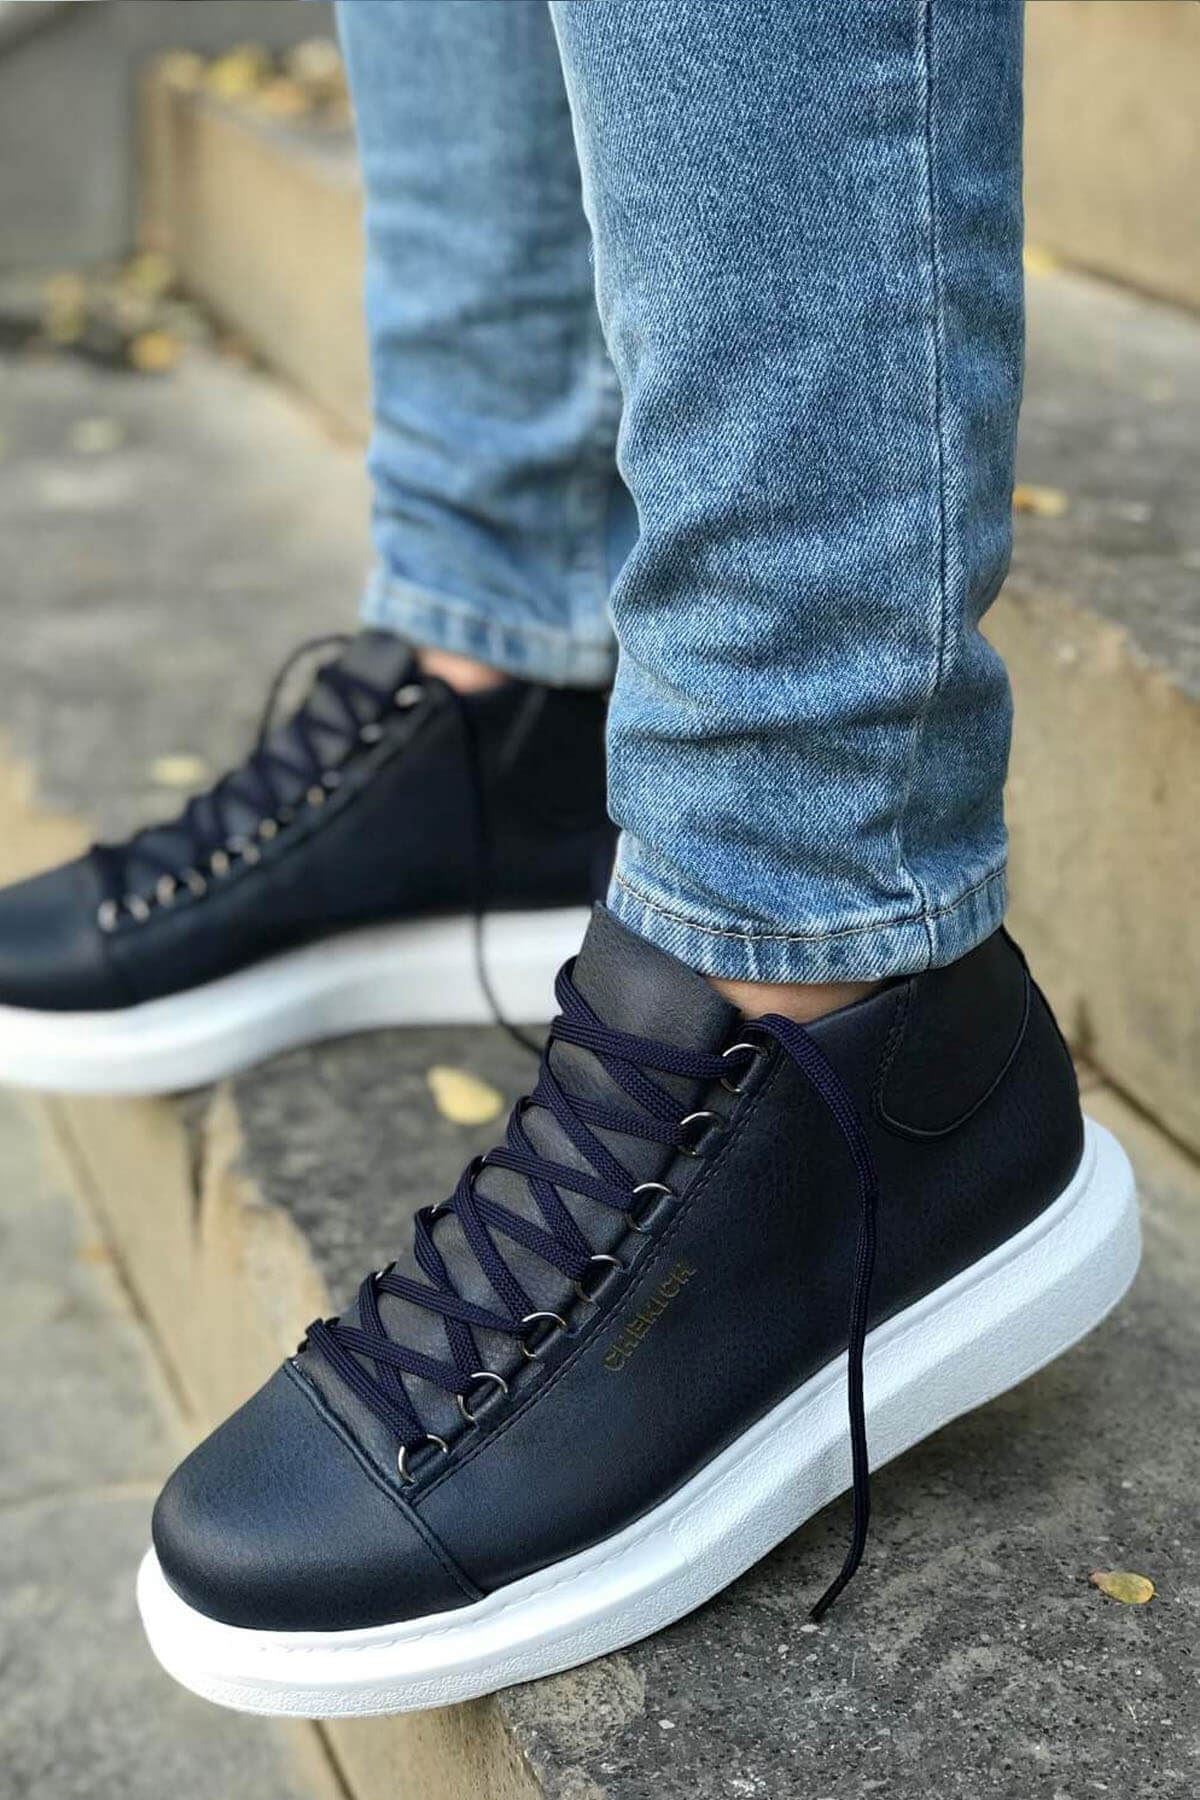 CH258 Men's Navy Blue-White Sole Metal Slug Lace-up High Sole Casual Sneaker Sports Boots - STREETMODE ™